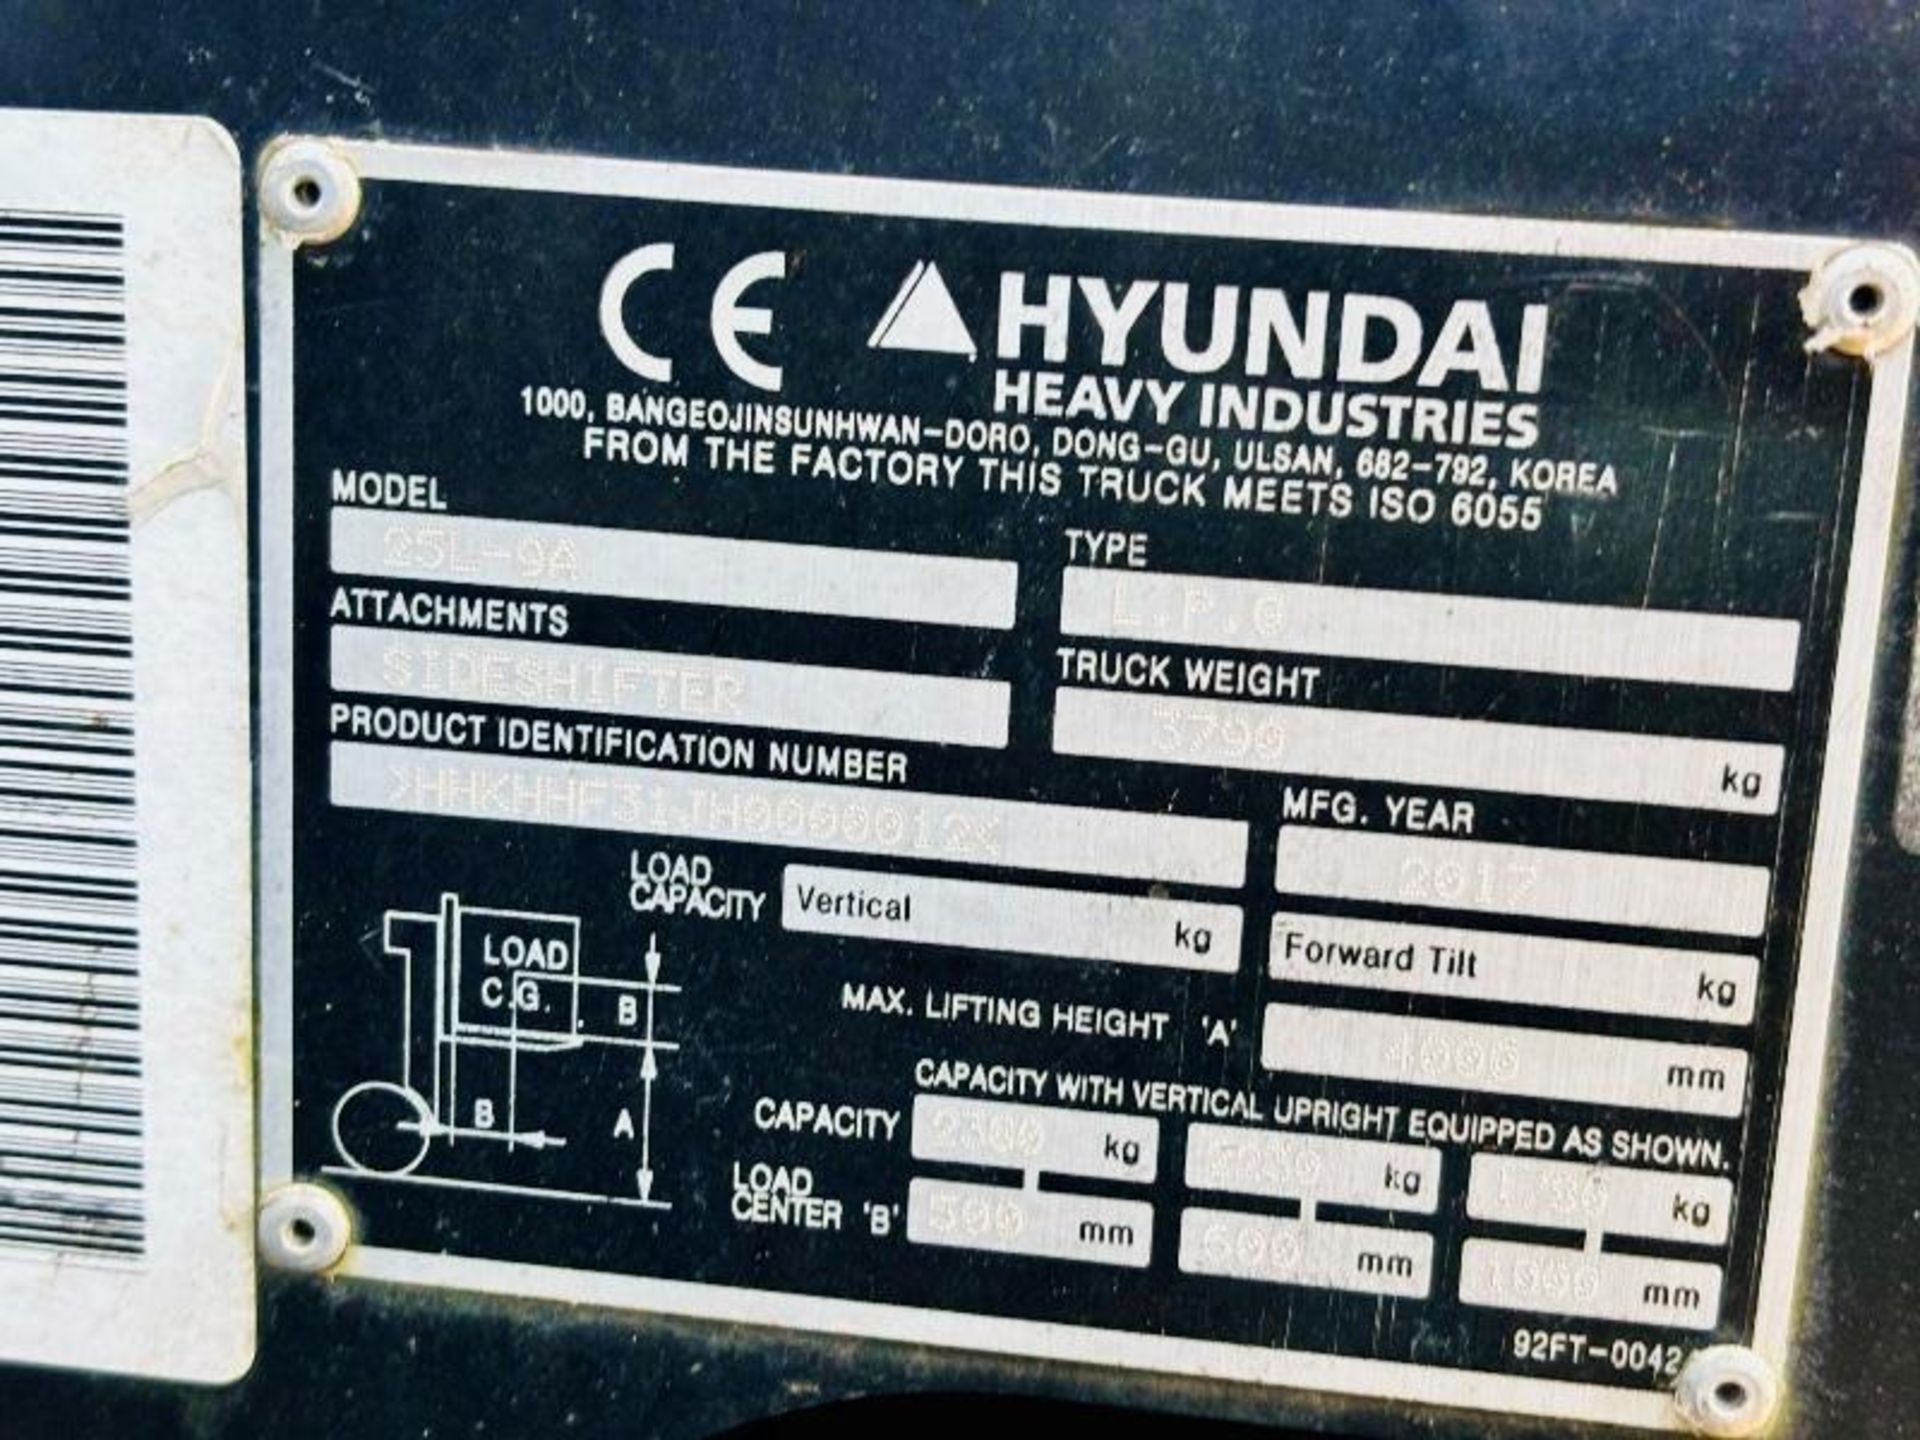 HYUNDAI 25L-9A CONTAINER SPEC FORKLIFT *YEAR 2017, 4463 HOURS* C/W PALLET TINES - Image 7 of 18